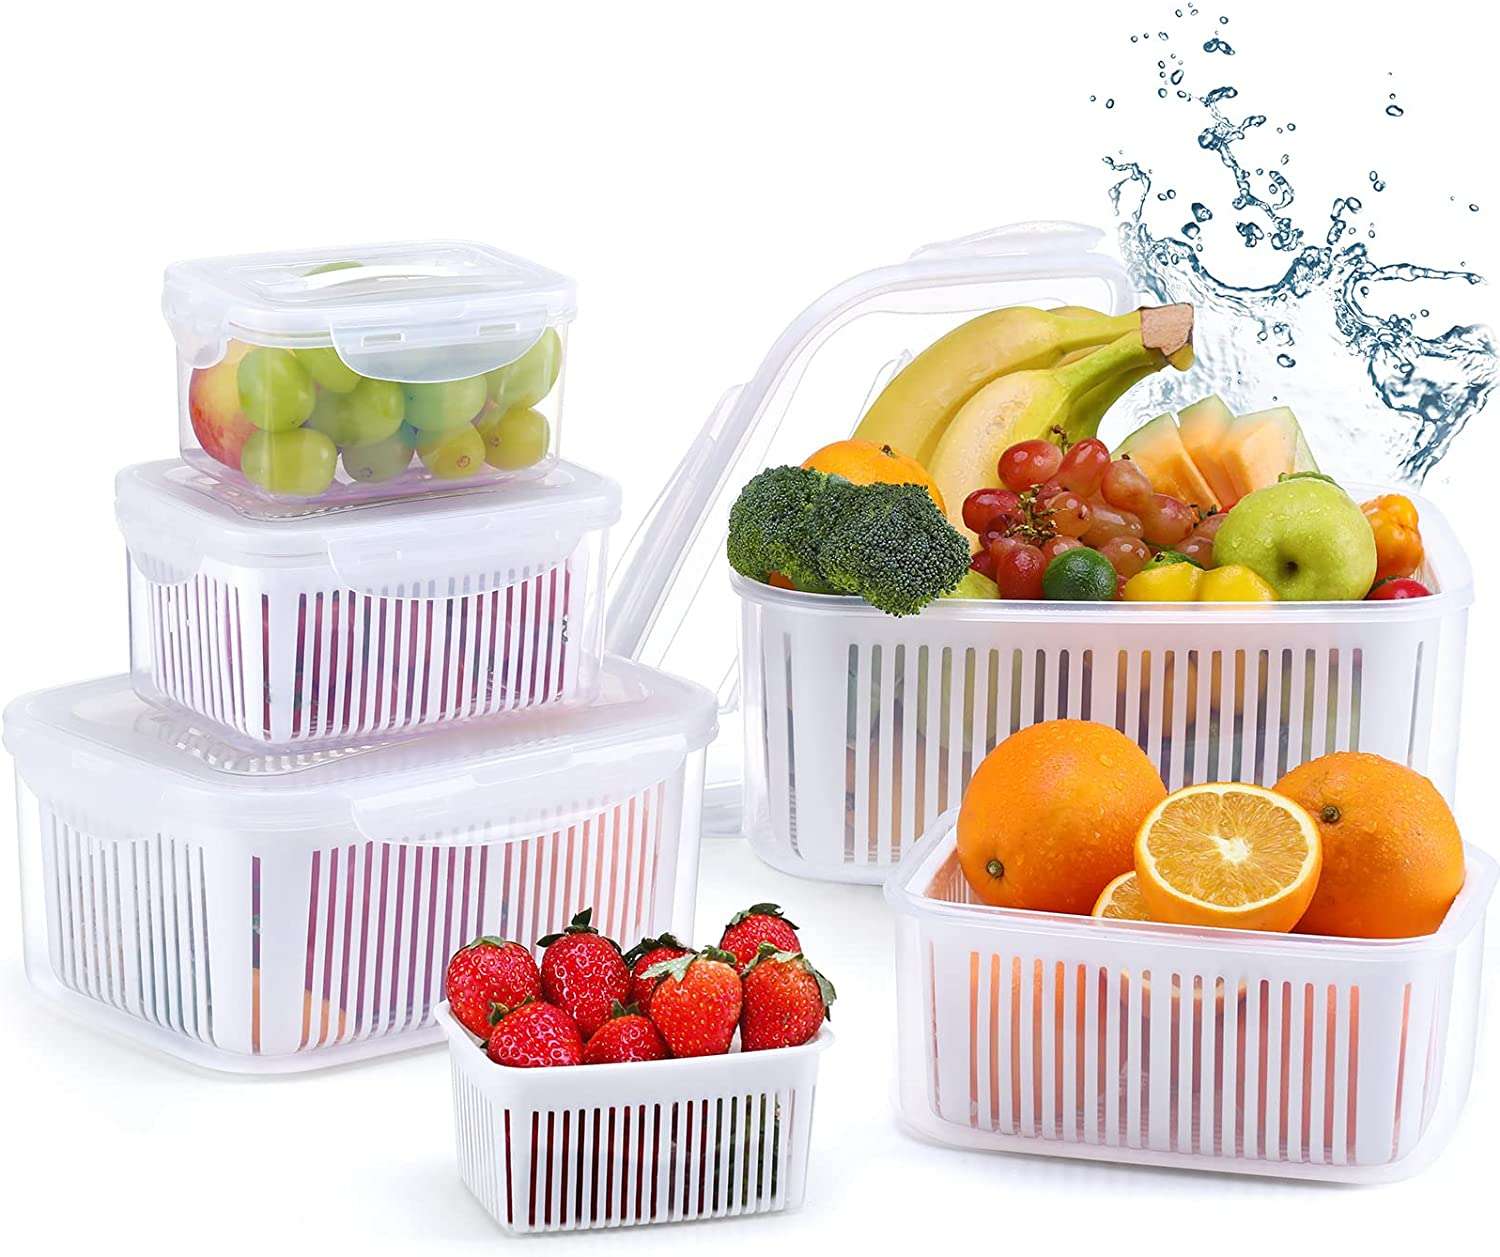 LUXEAR Fruit Vegetable Storage Saver Containers Review